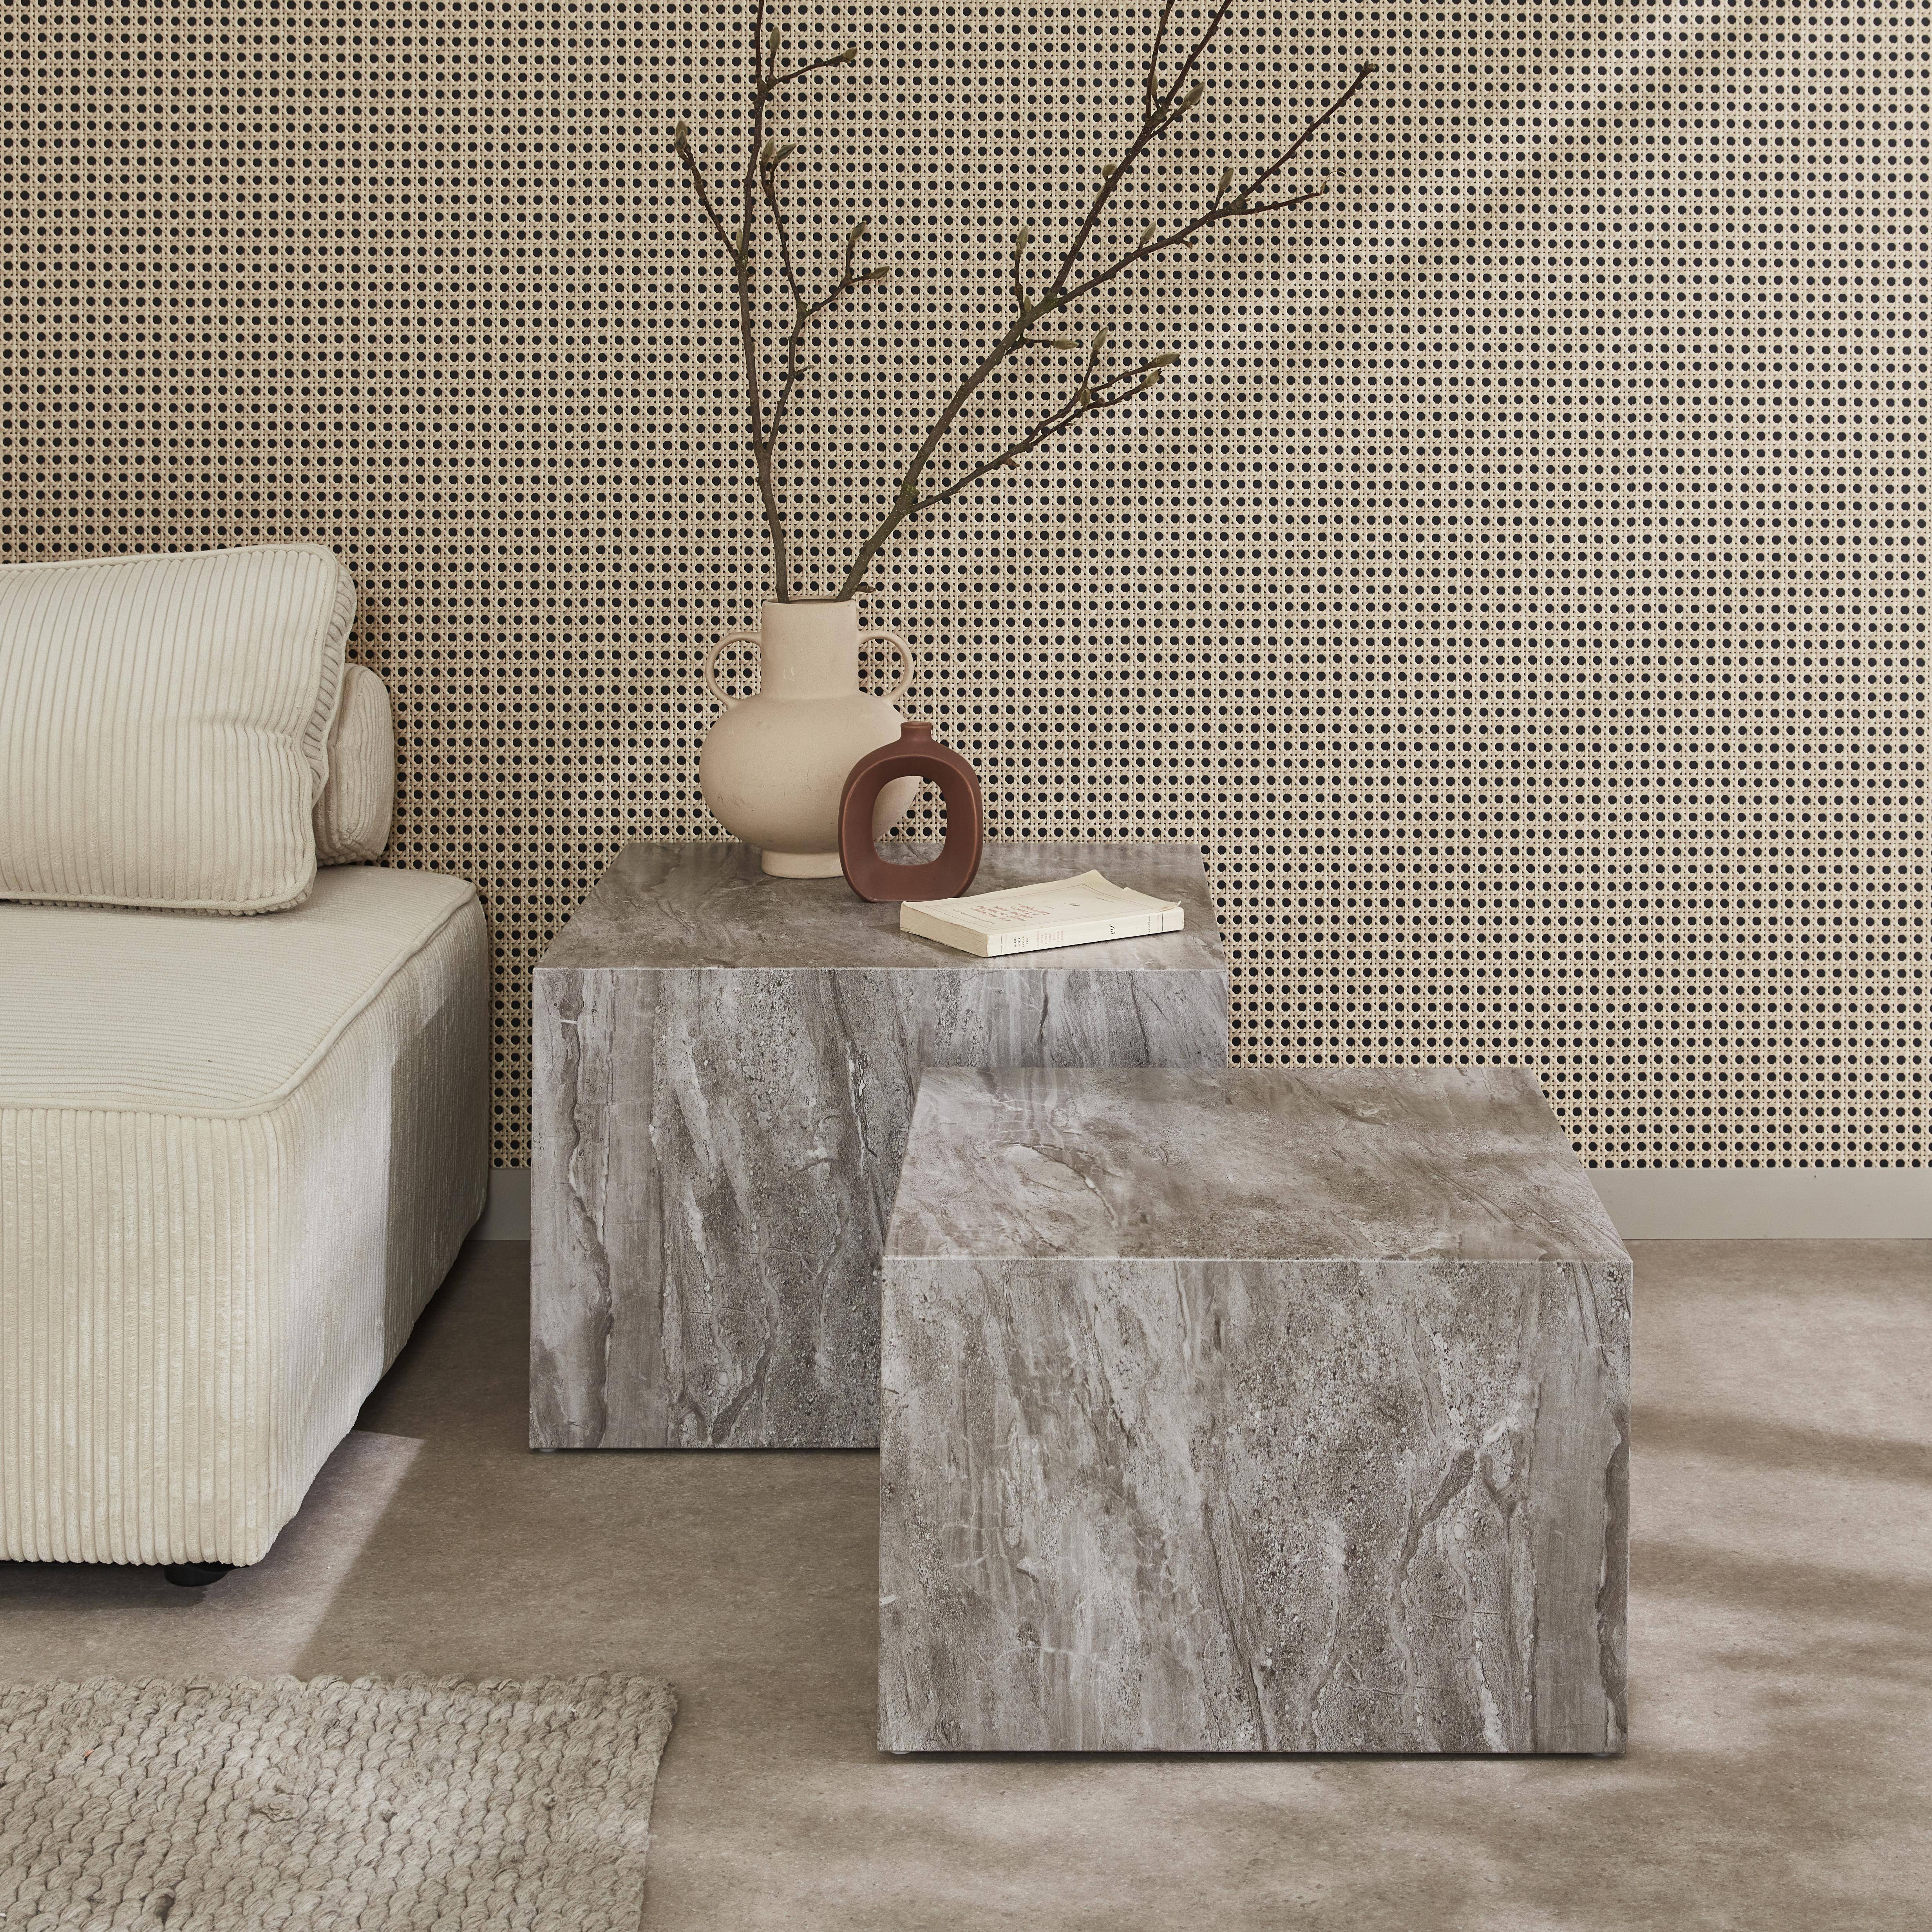 Set of 2 square coffee tables with marble effect, grey, L50xW50xH33cm &  L58xW58xH40cm, Paros,sweeek,Photo1